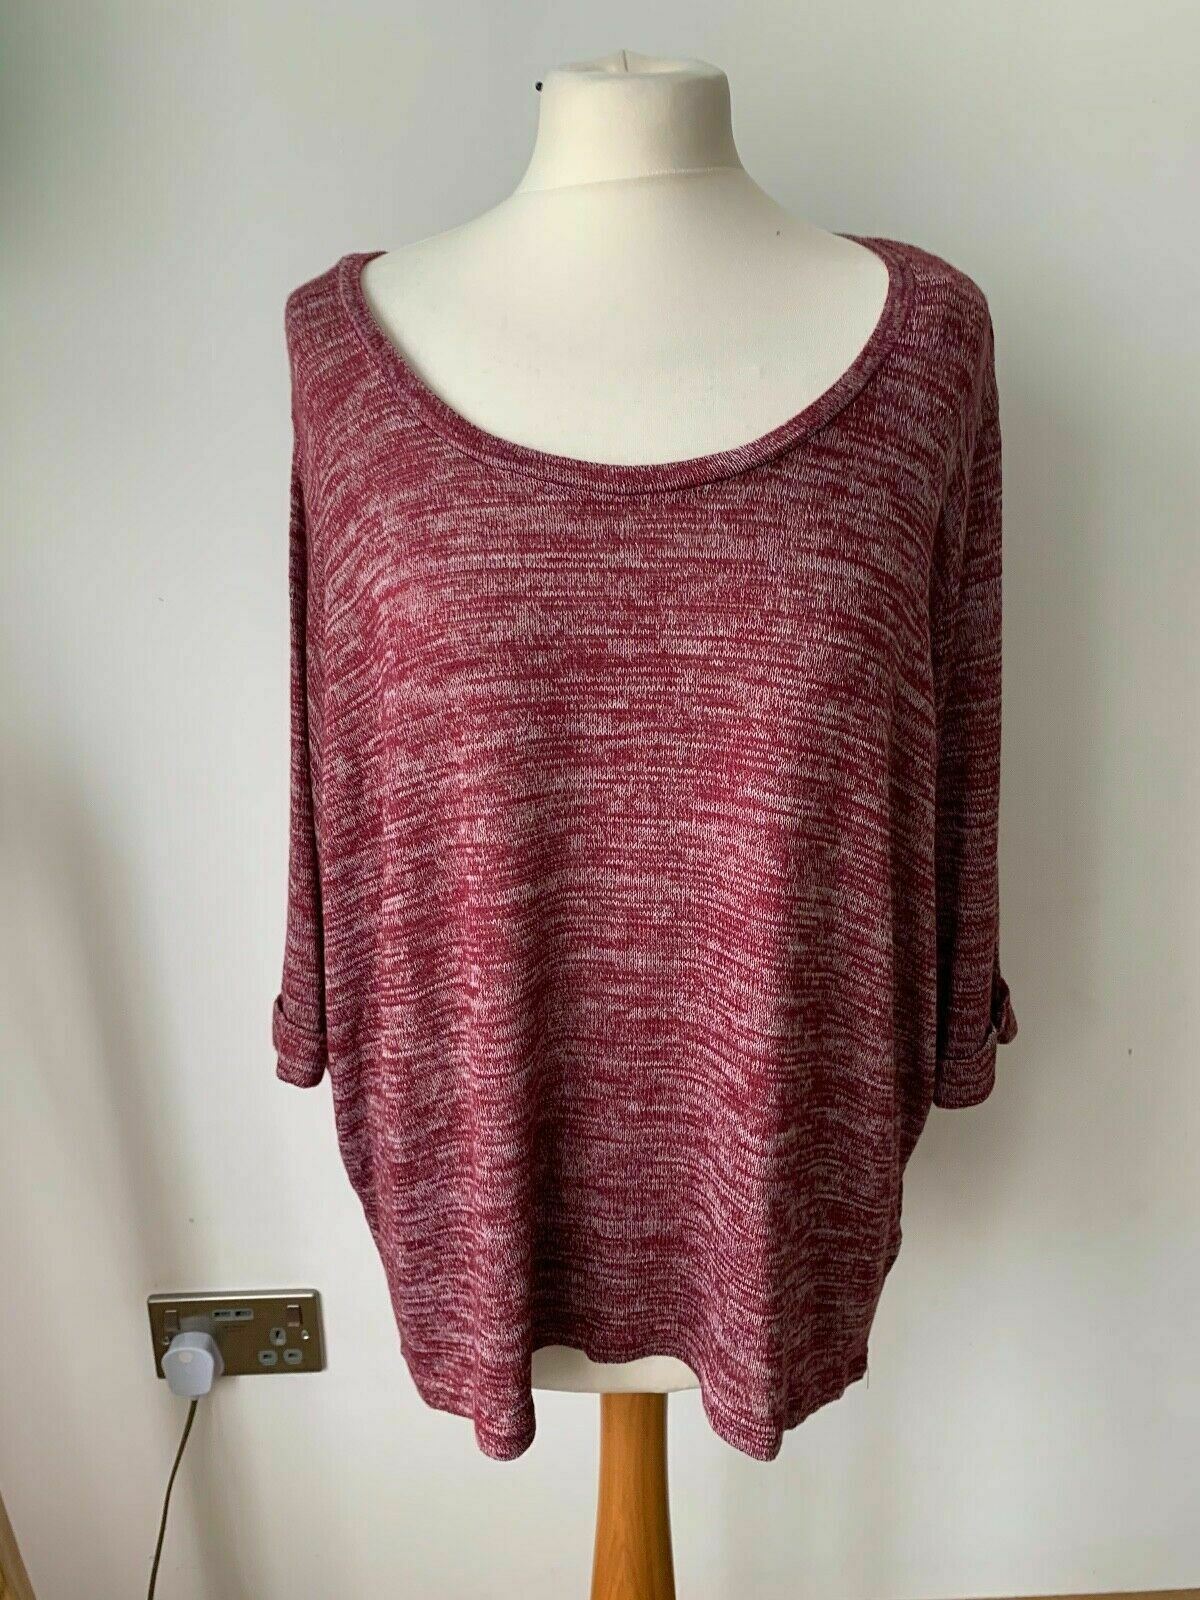 New Look Burgundy Lightweight Knit Short Sleeve Jumper Sizes 22 and 20 available